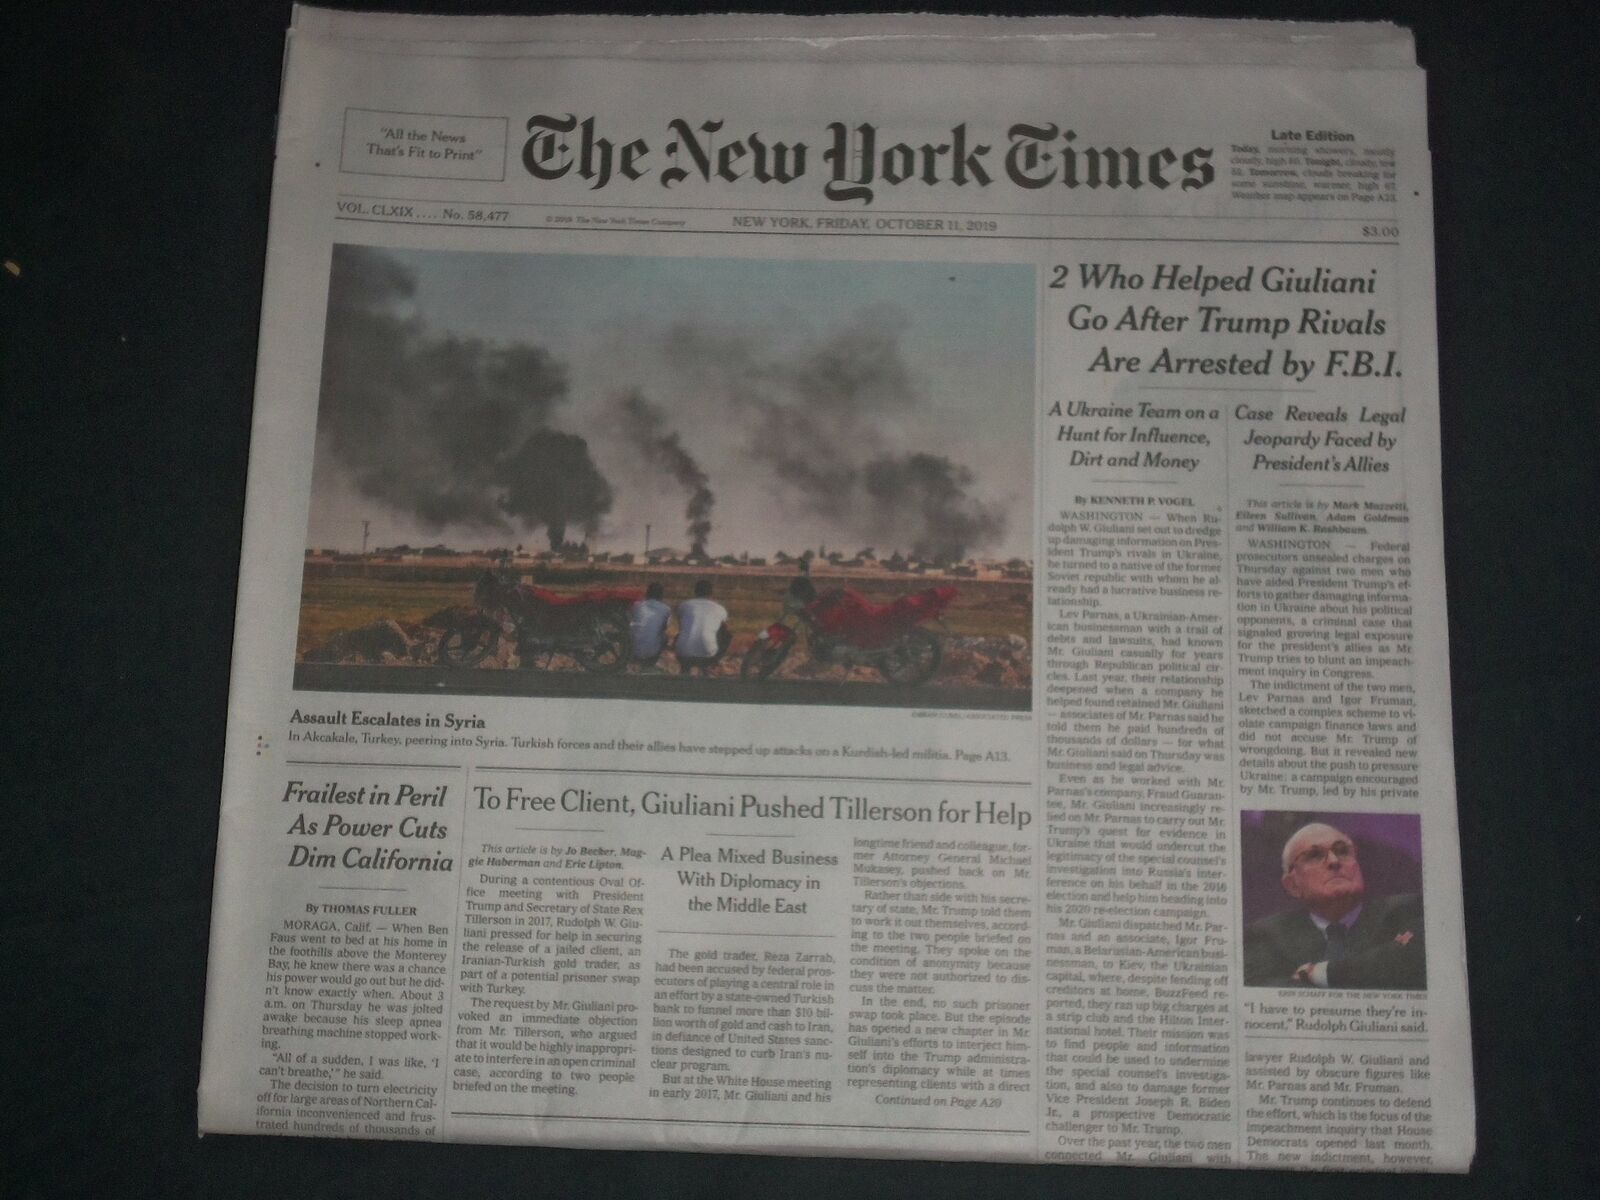 2019 OCTOBER 11 NEW YORK TIMES - 2 WHO HELPED GIULIANI ARE ARRESTED BY FBI